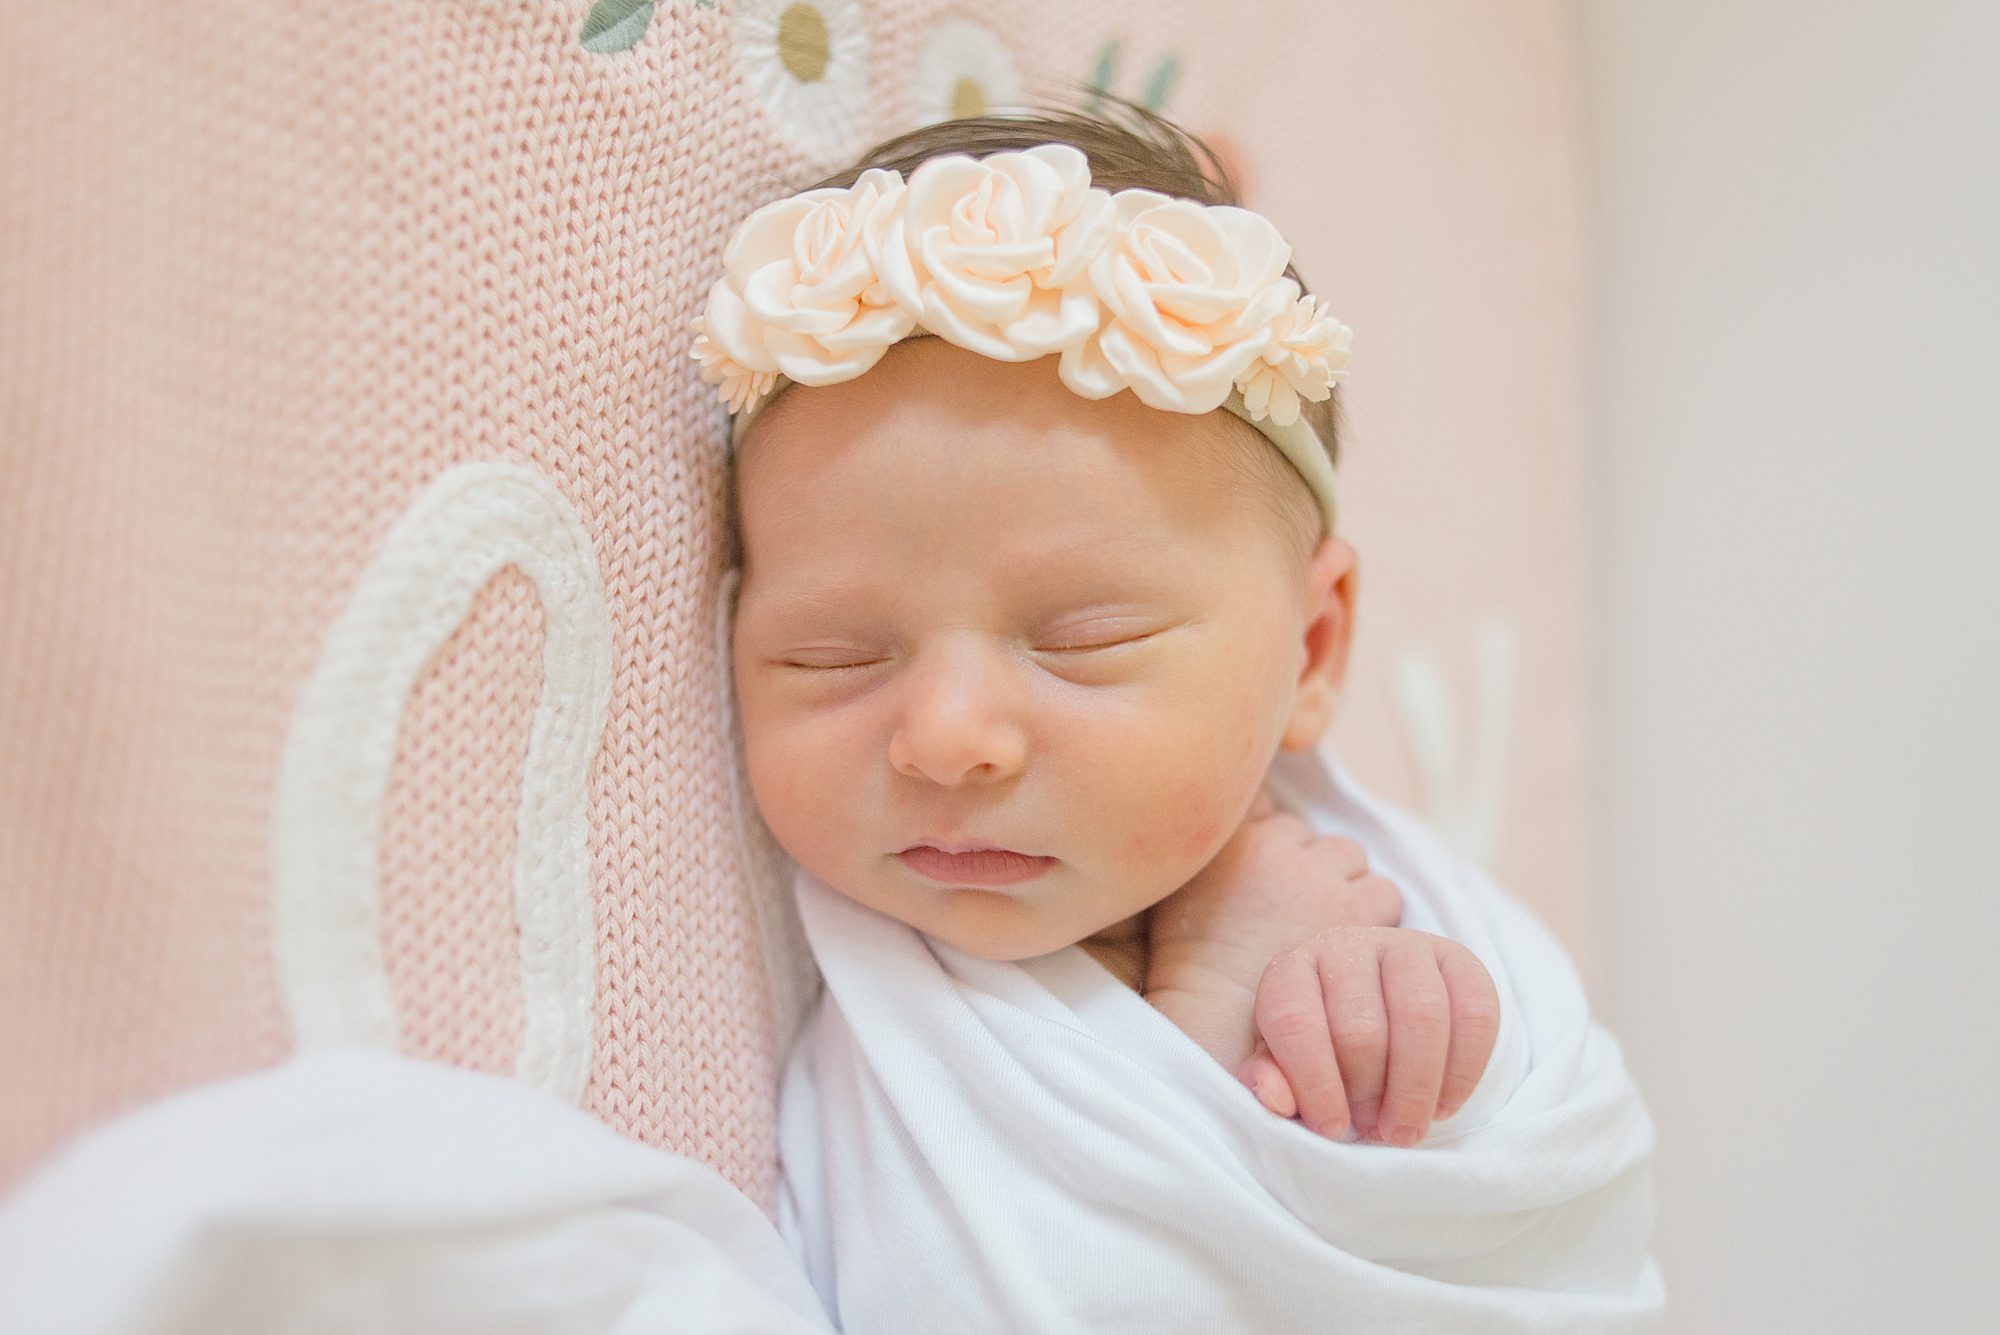 baby girl sleeps soundly during Timeless Newborn Portraits